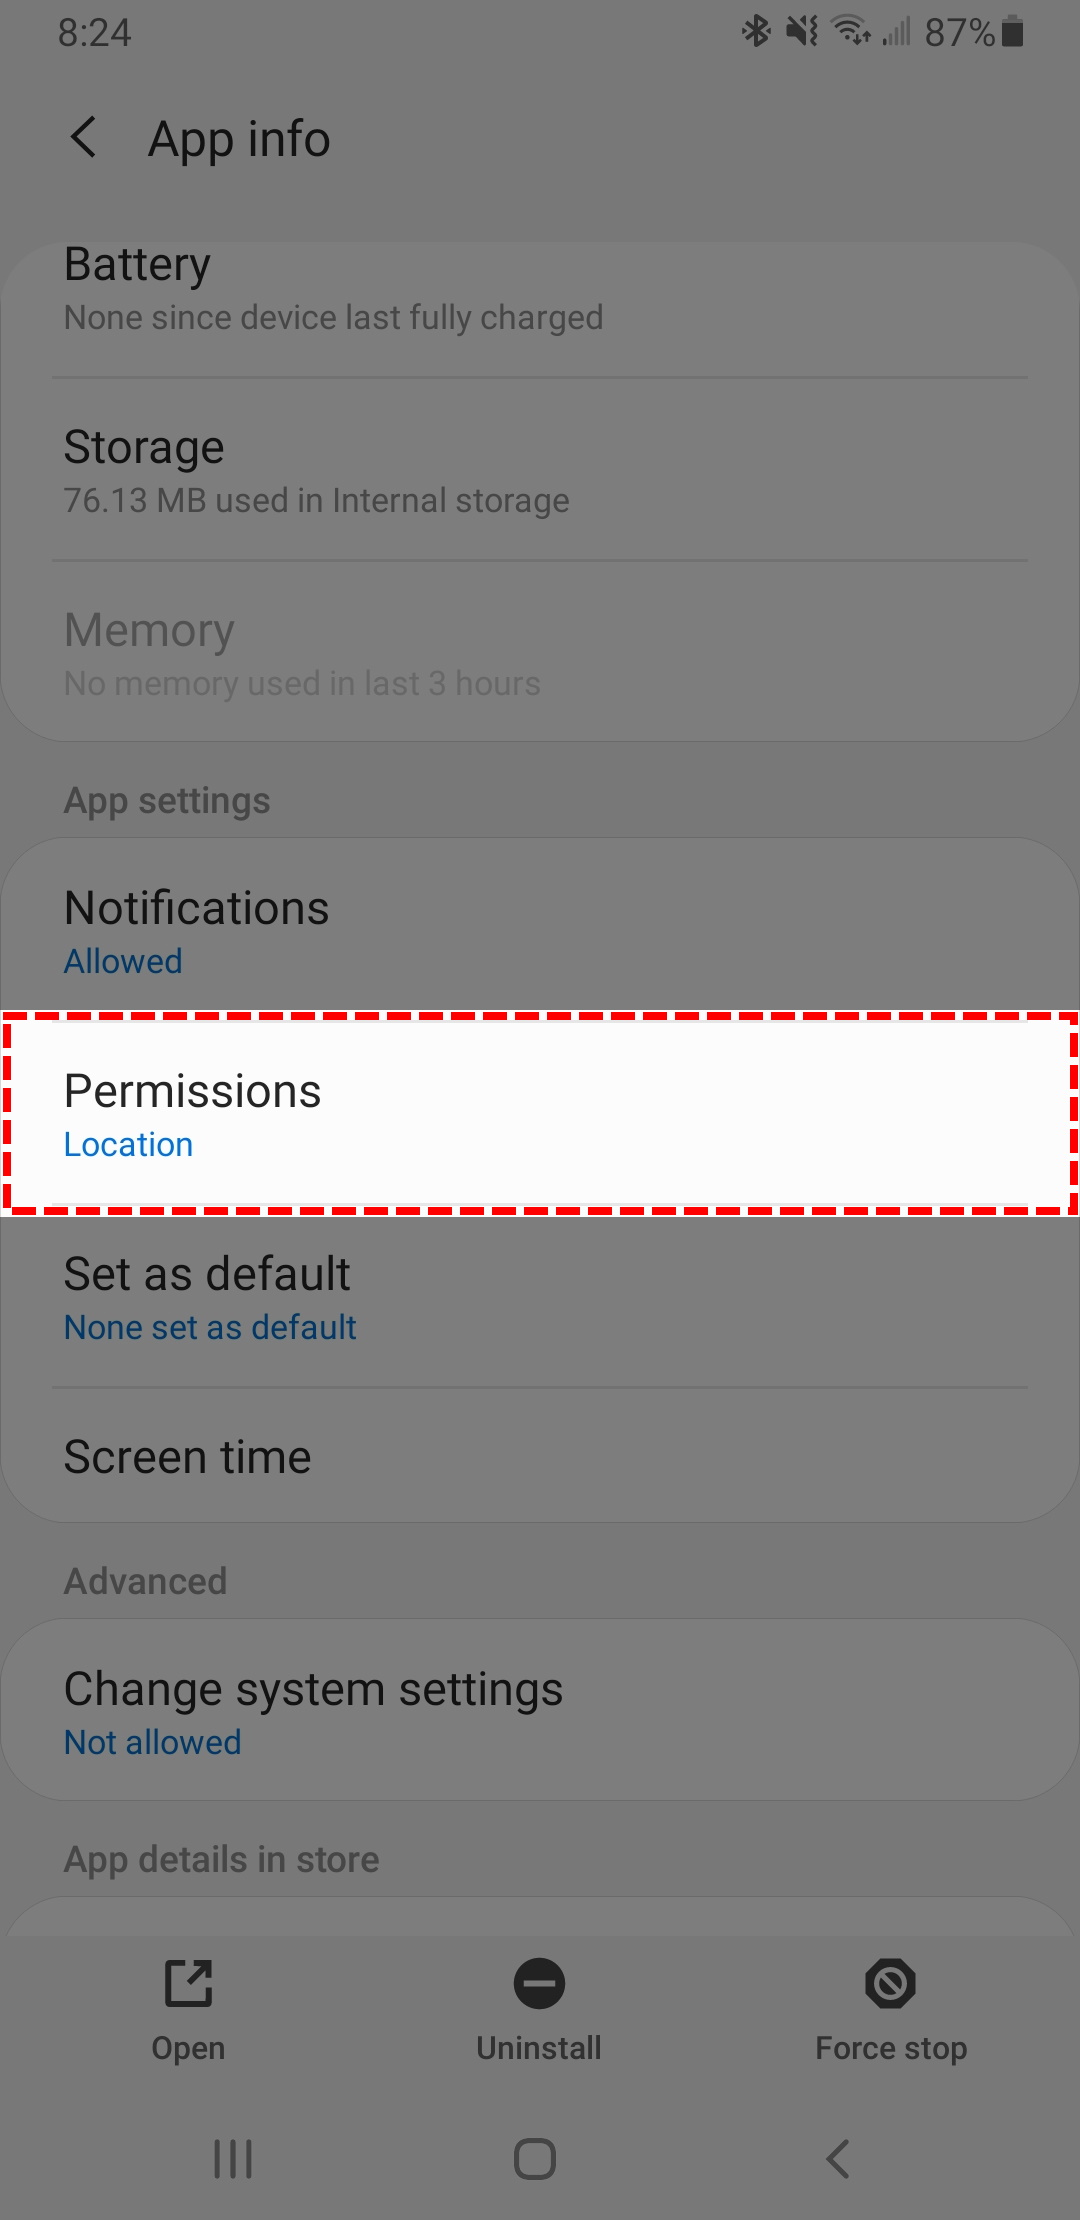 ML_app_info_screen_scrolled_to_permissions_-_Permissions_highlisted..jpg